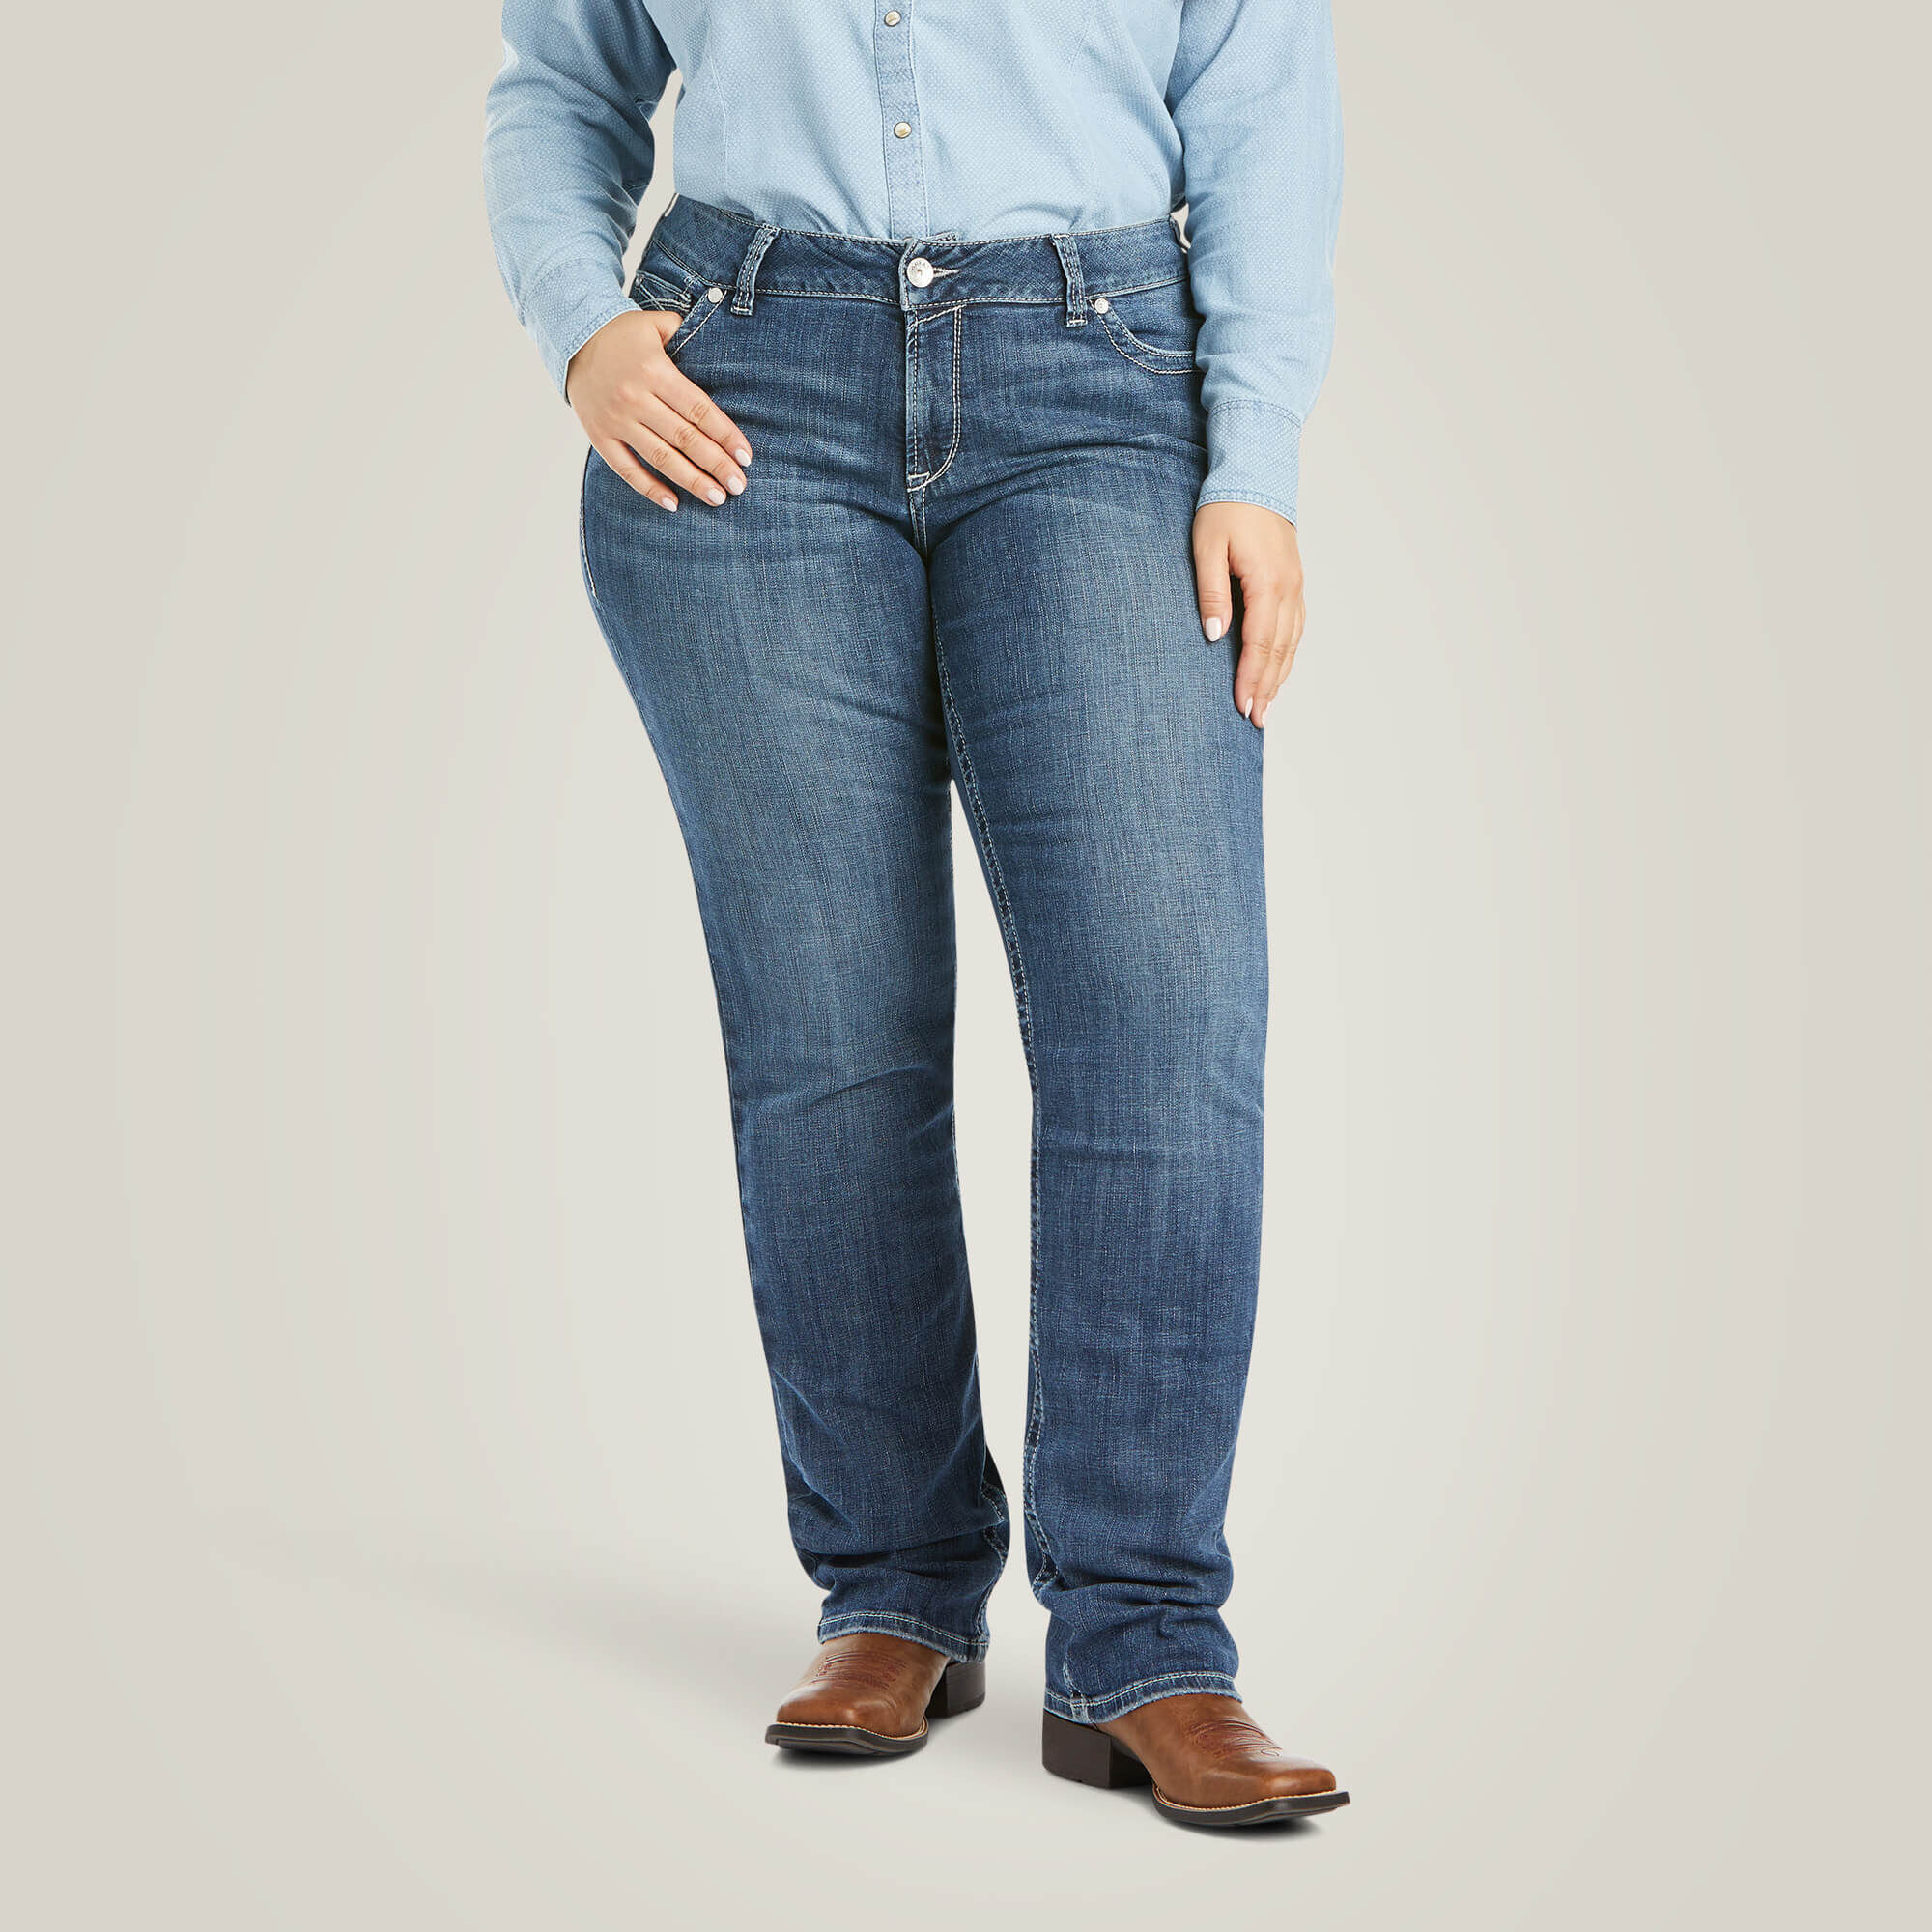 Women's R.E.A.L. Mid Rise Arrow Gianna Straight Jeans in Stryker, Size: 25  Regular by Ariat